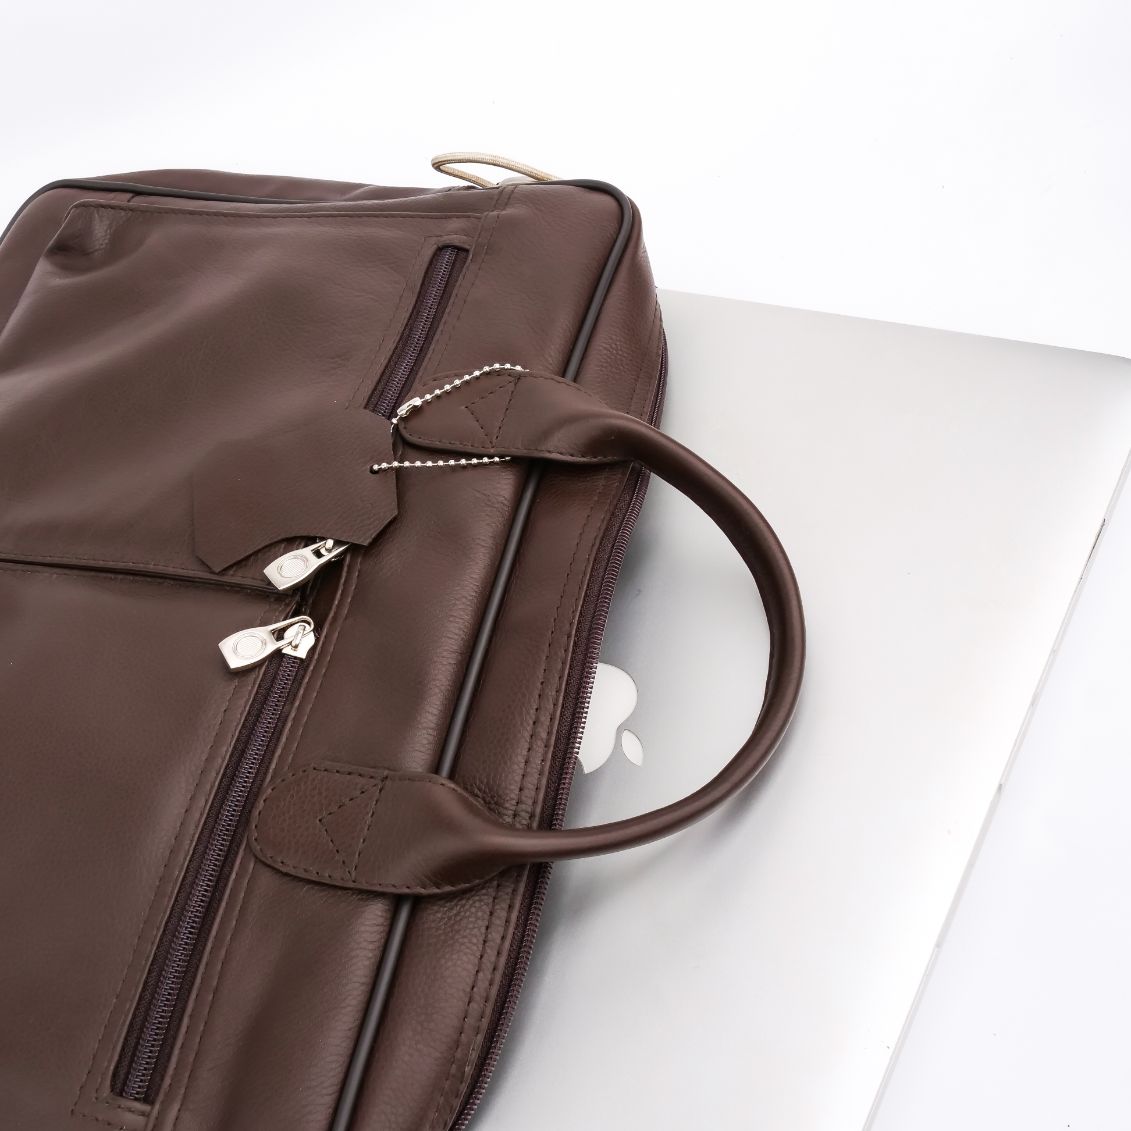 The Ultimate Leather Breifcase Bag-Dark Brown